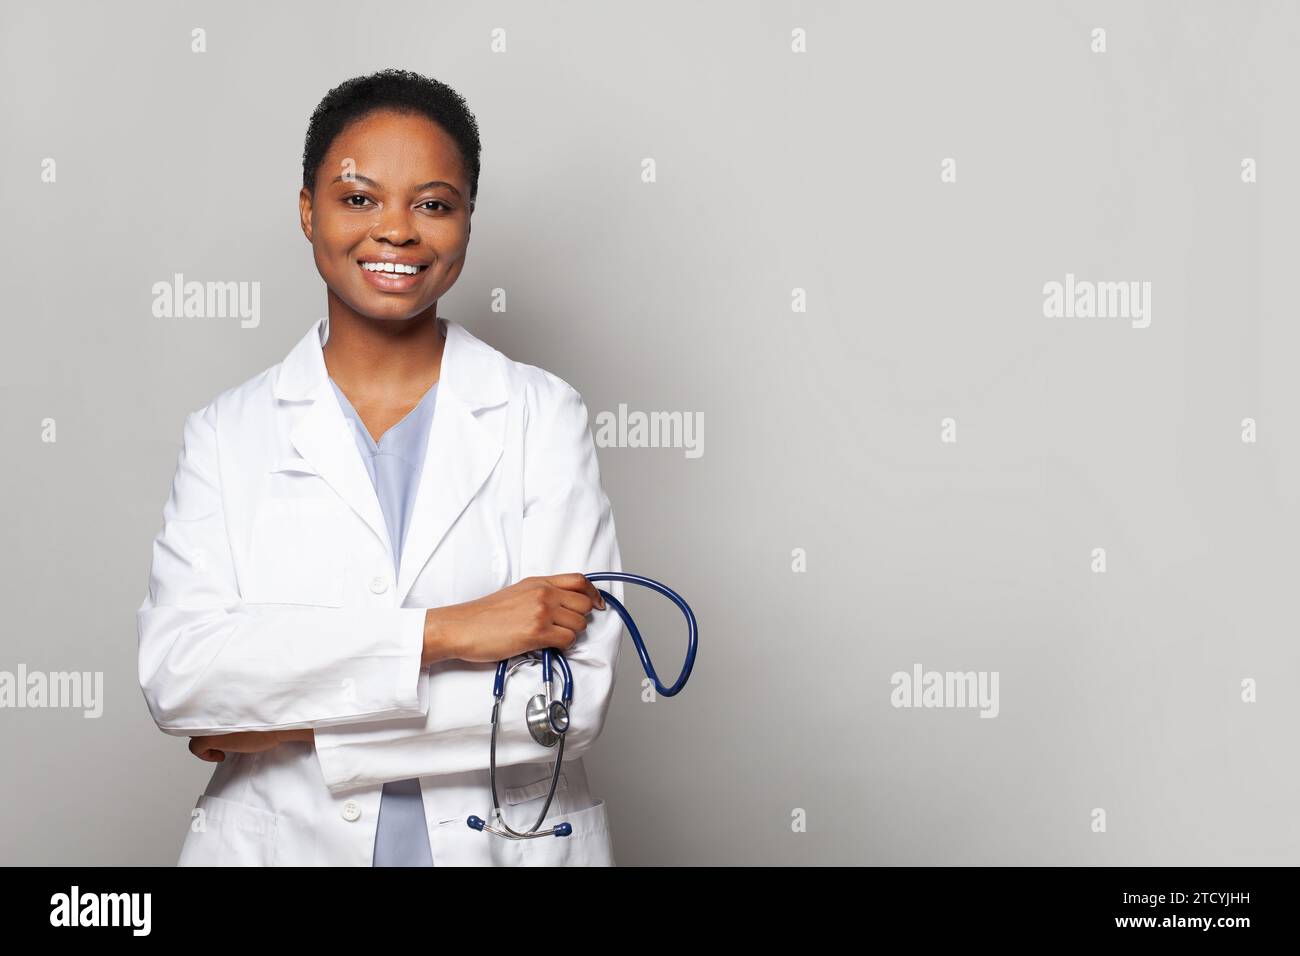 Young african american doctor woman wearing medical coat over gray background. Happy smiling nurse with crossed arms looking at the camera. Positive p Stock Photo